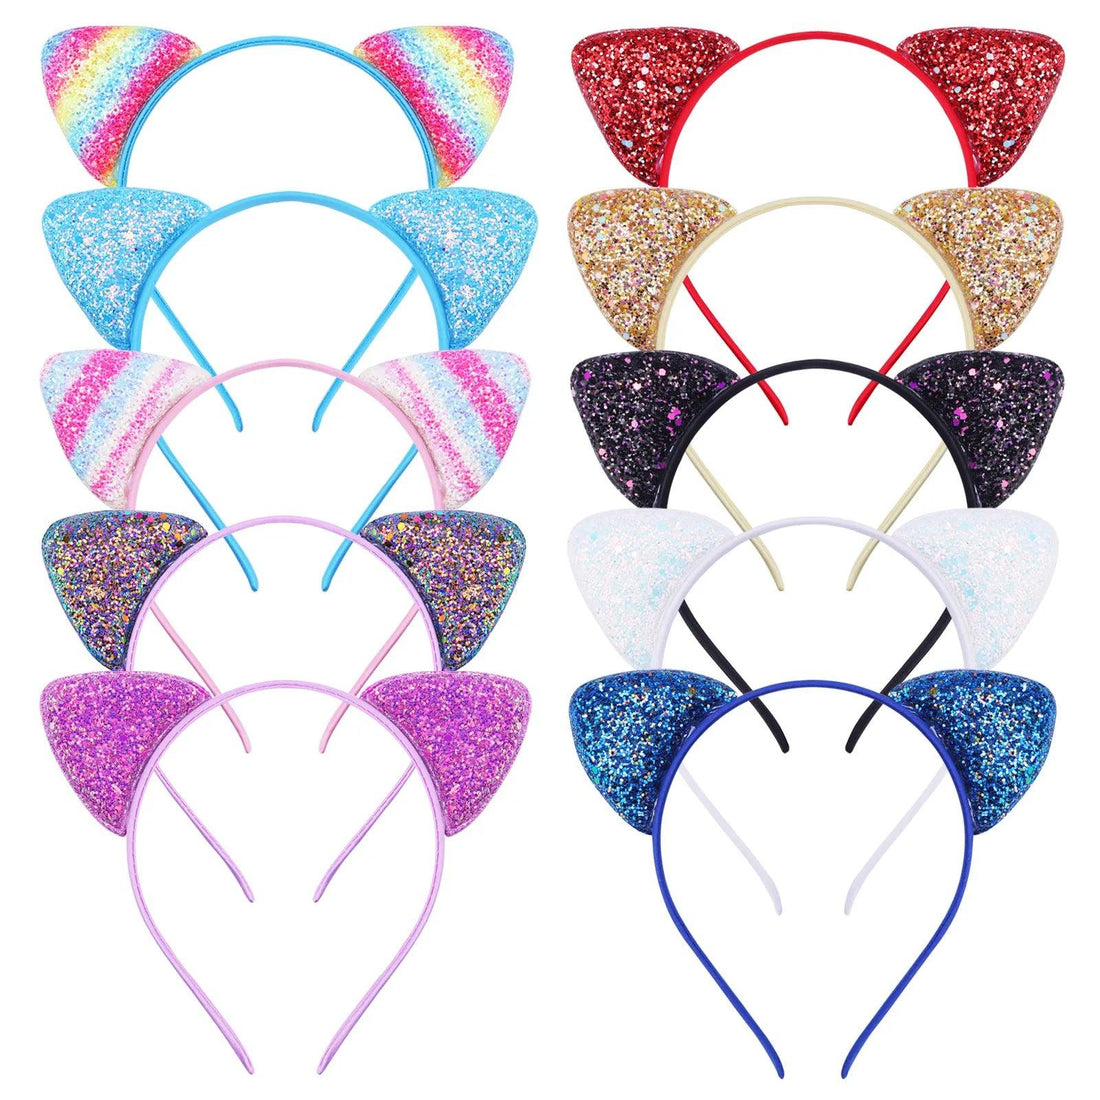 Glitter Sequins Cat Ears Head band, 12 Color Variations - Just Cats - Gifts for Cat Lovers